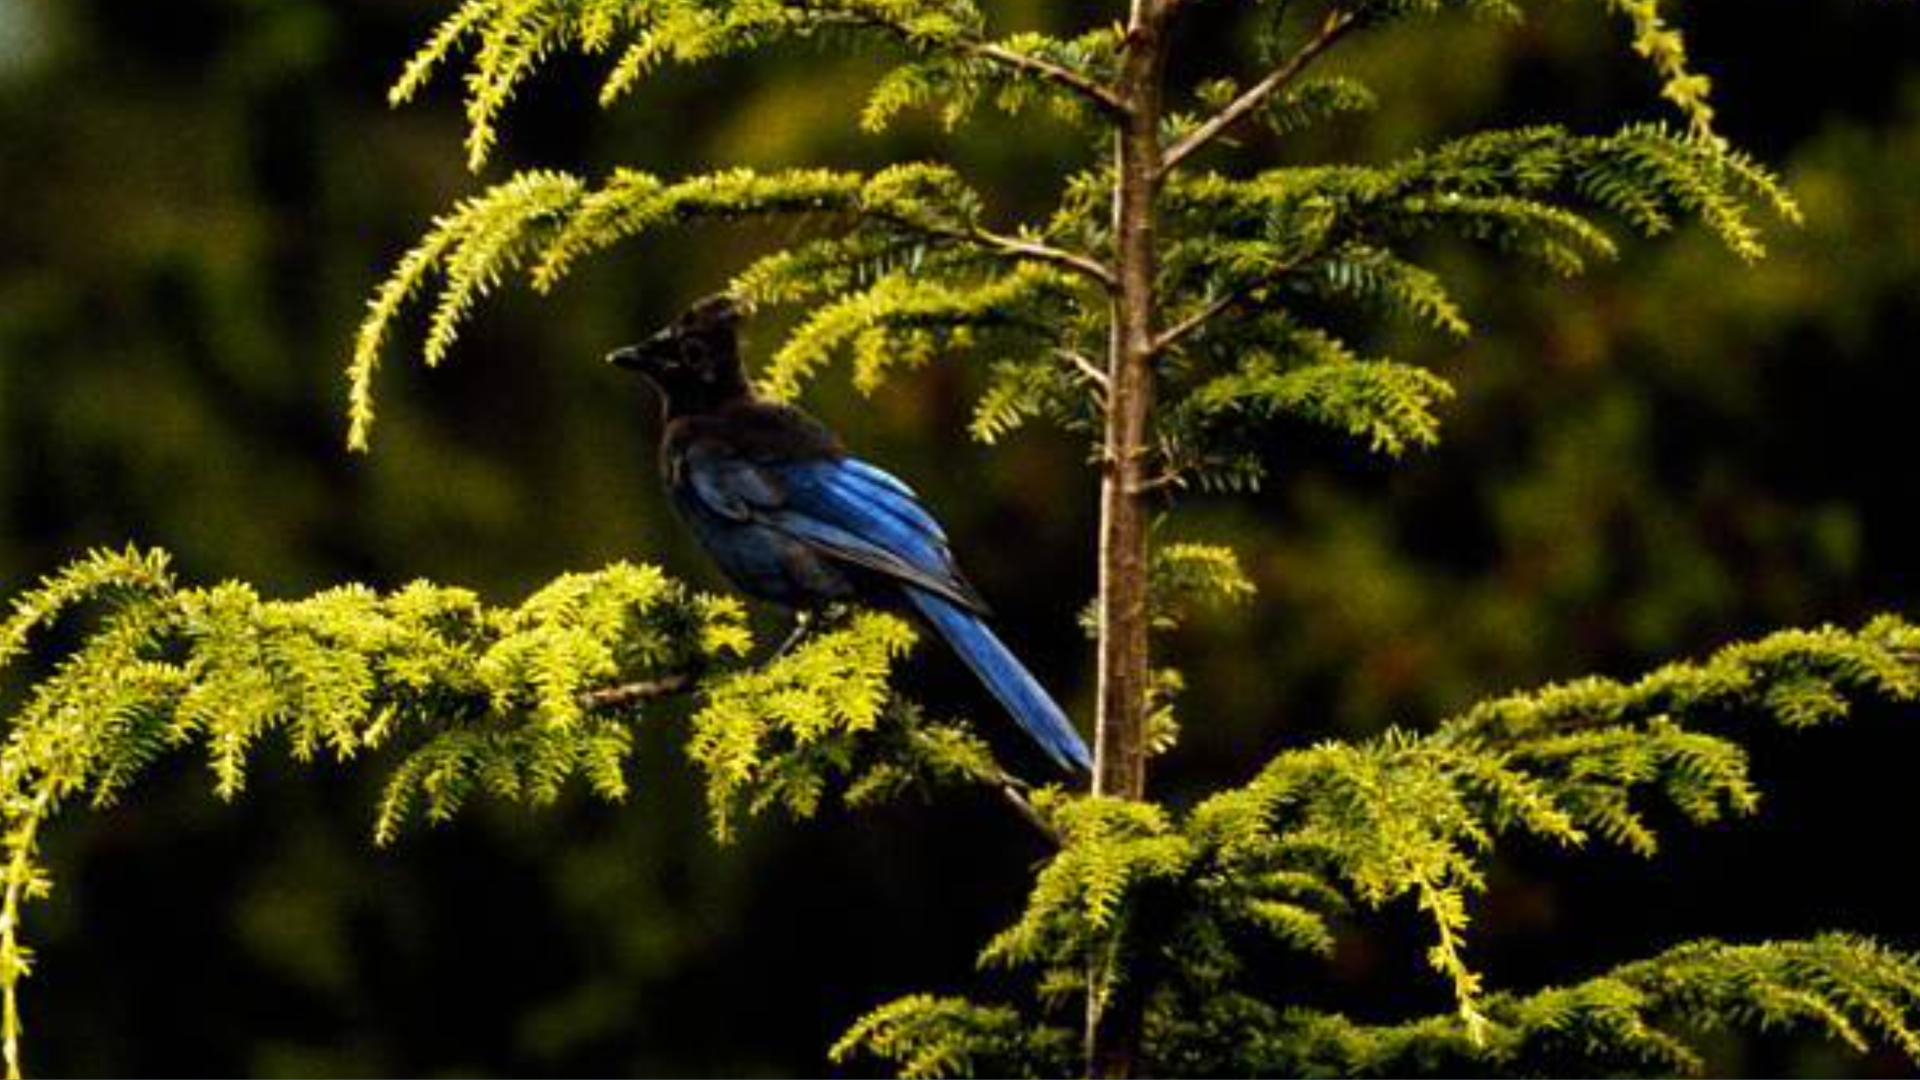 Bird on a tree, with blue feathers